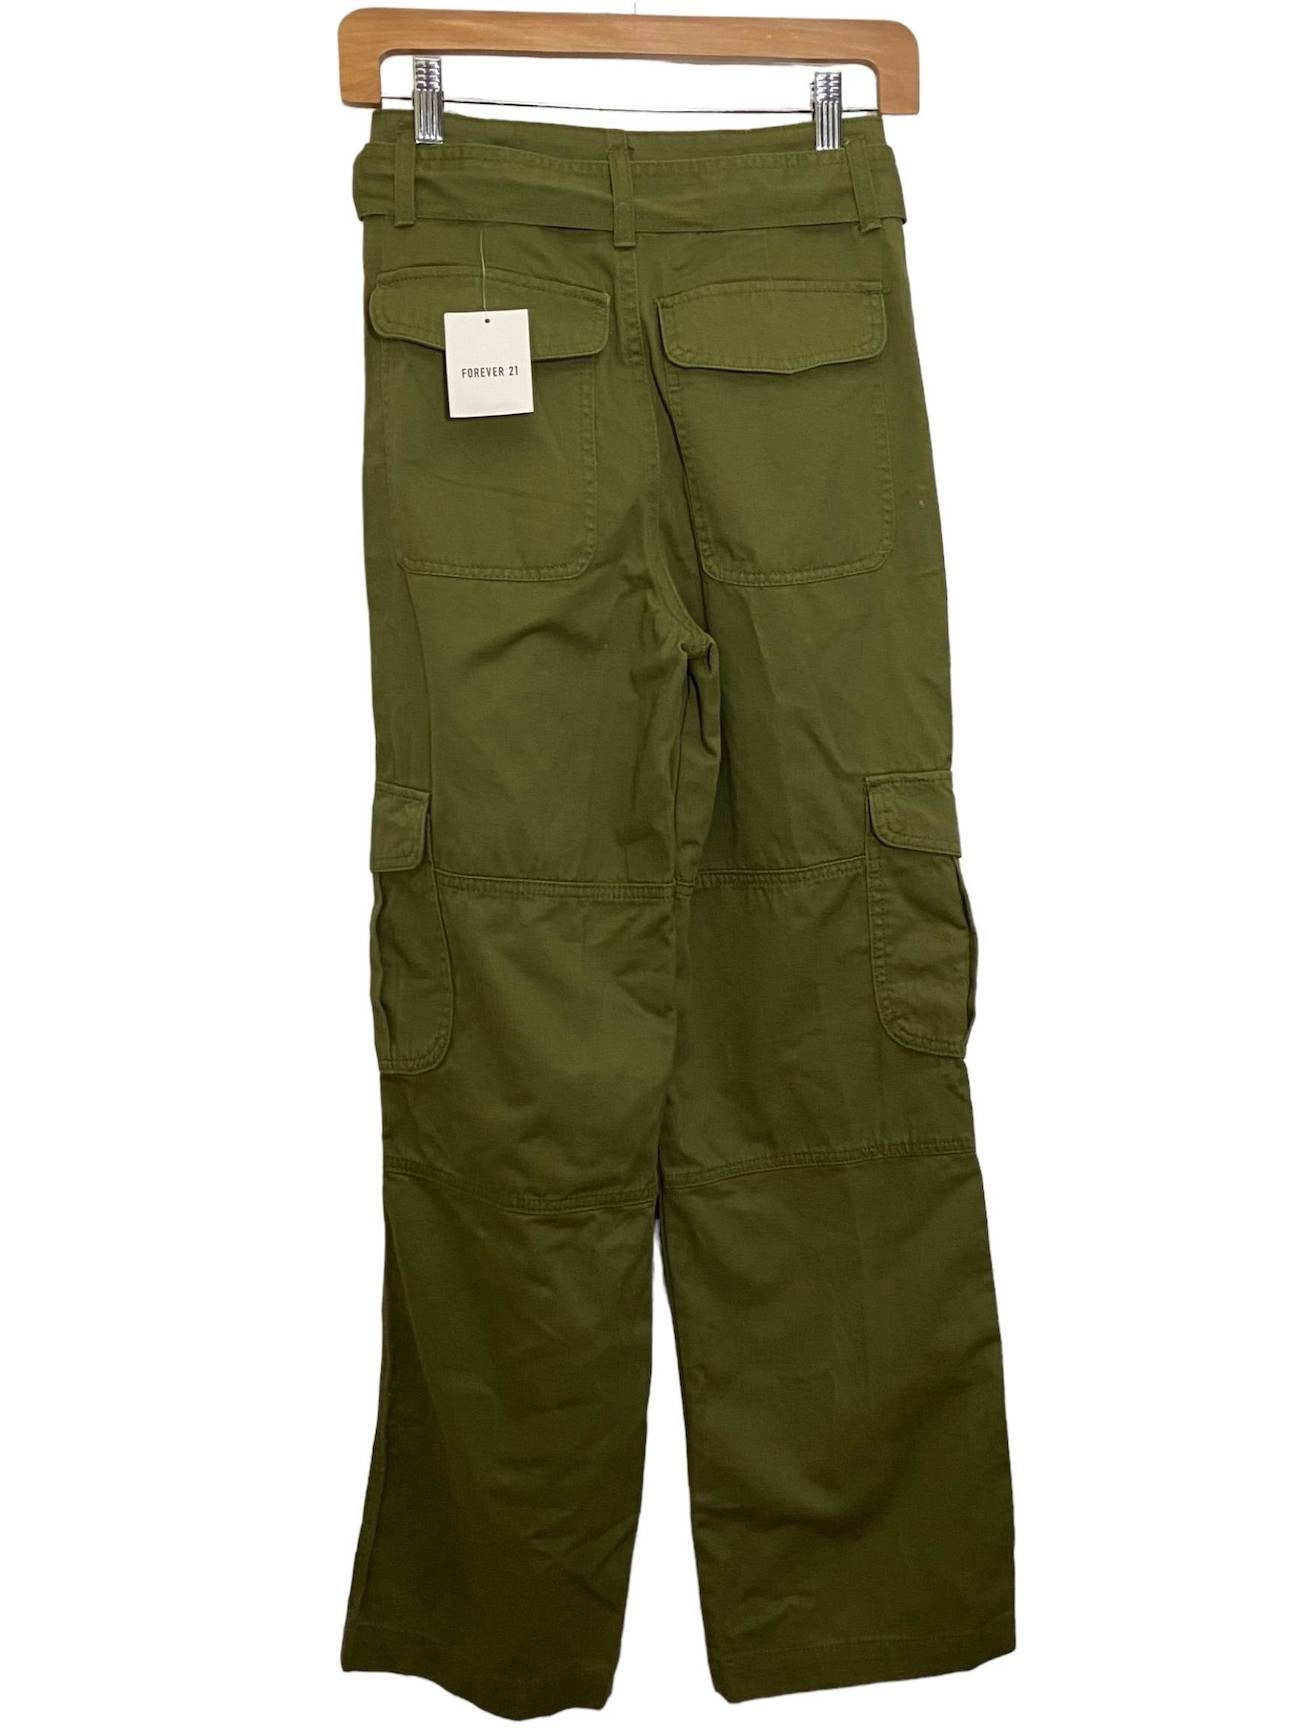 Olive Cargo Pants  Forever 21